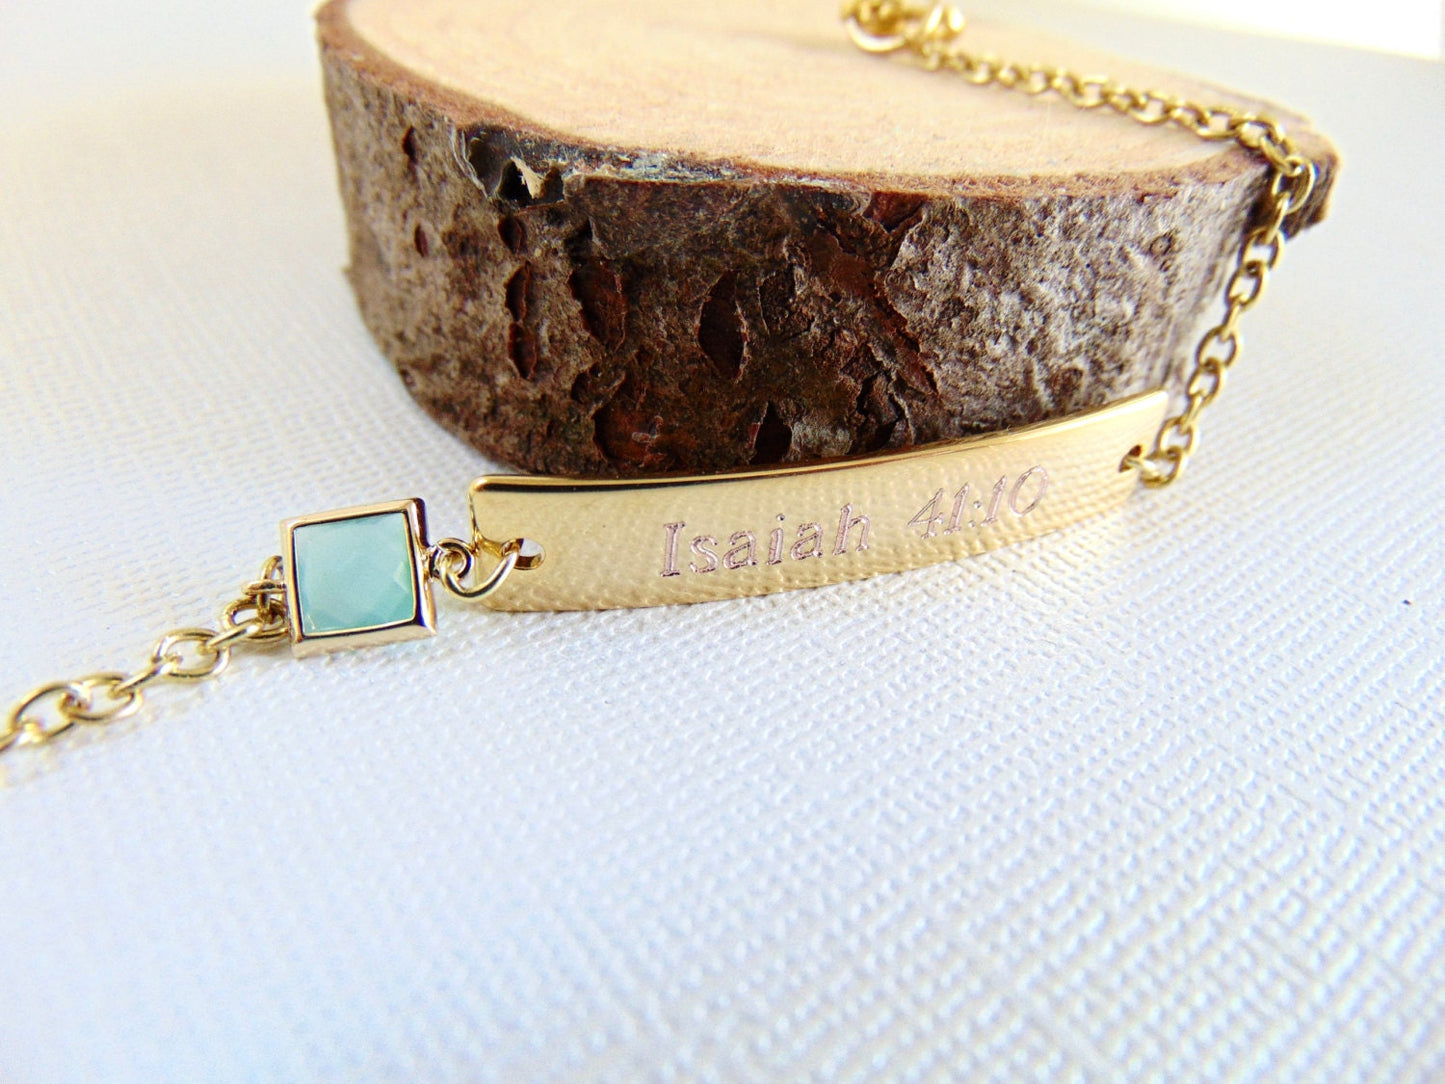 Personalized engraving on gold Bar Bracelet and mint stone